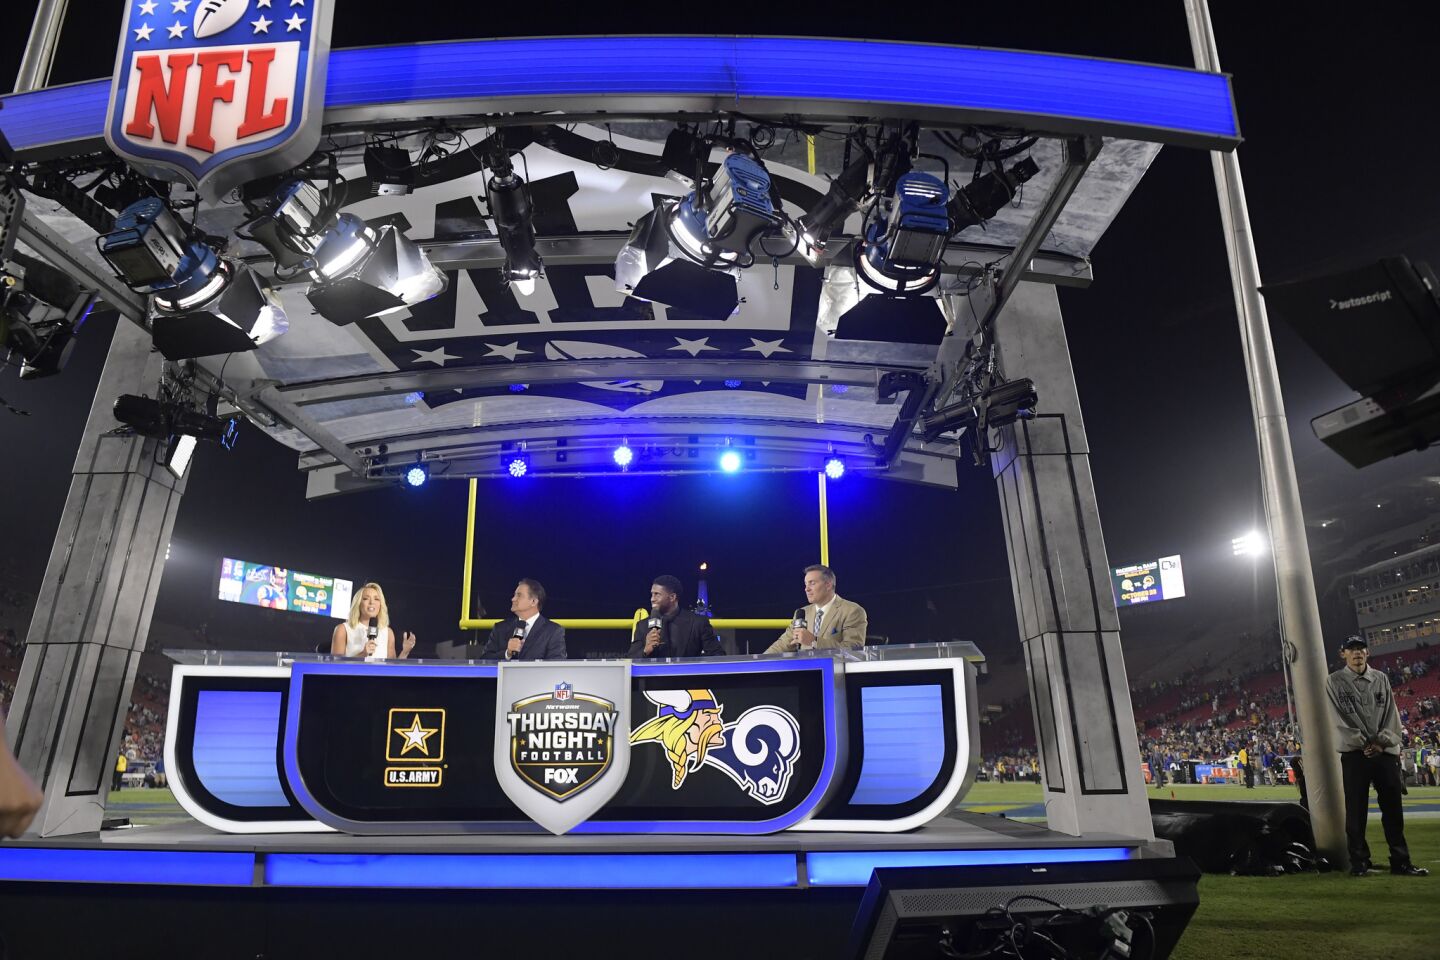 The NFL Network TNF set is seen inside the Los Angeles Coliseum after an NFL football game between the Los Angeles Rams and the Minnesota Vikings Thursday, Sept. 27, 2018, in Los Angeles. (AP Photo/Mark J. Terrill)